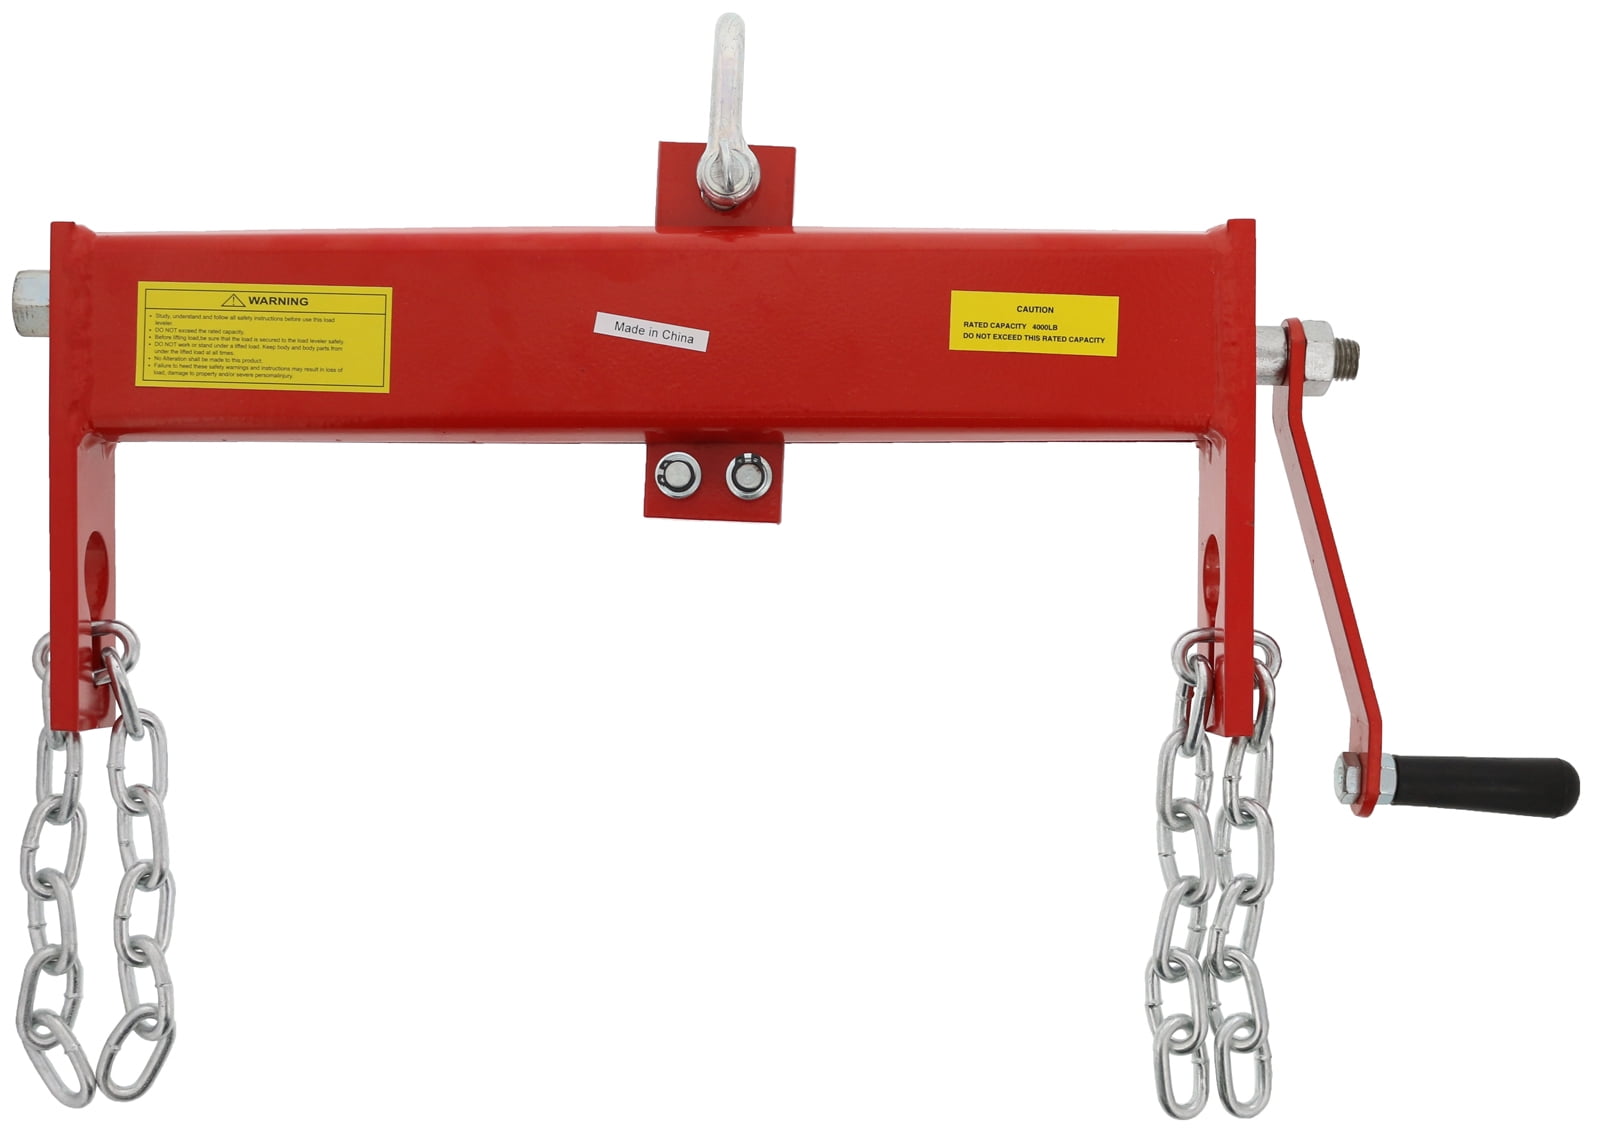 Harbor Freight Engine Hoist 2 Ton / Harbor Freight Coupon Hoist : See more of harbor freight ...